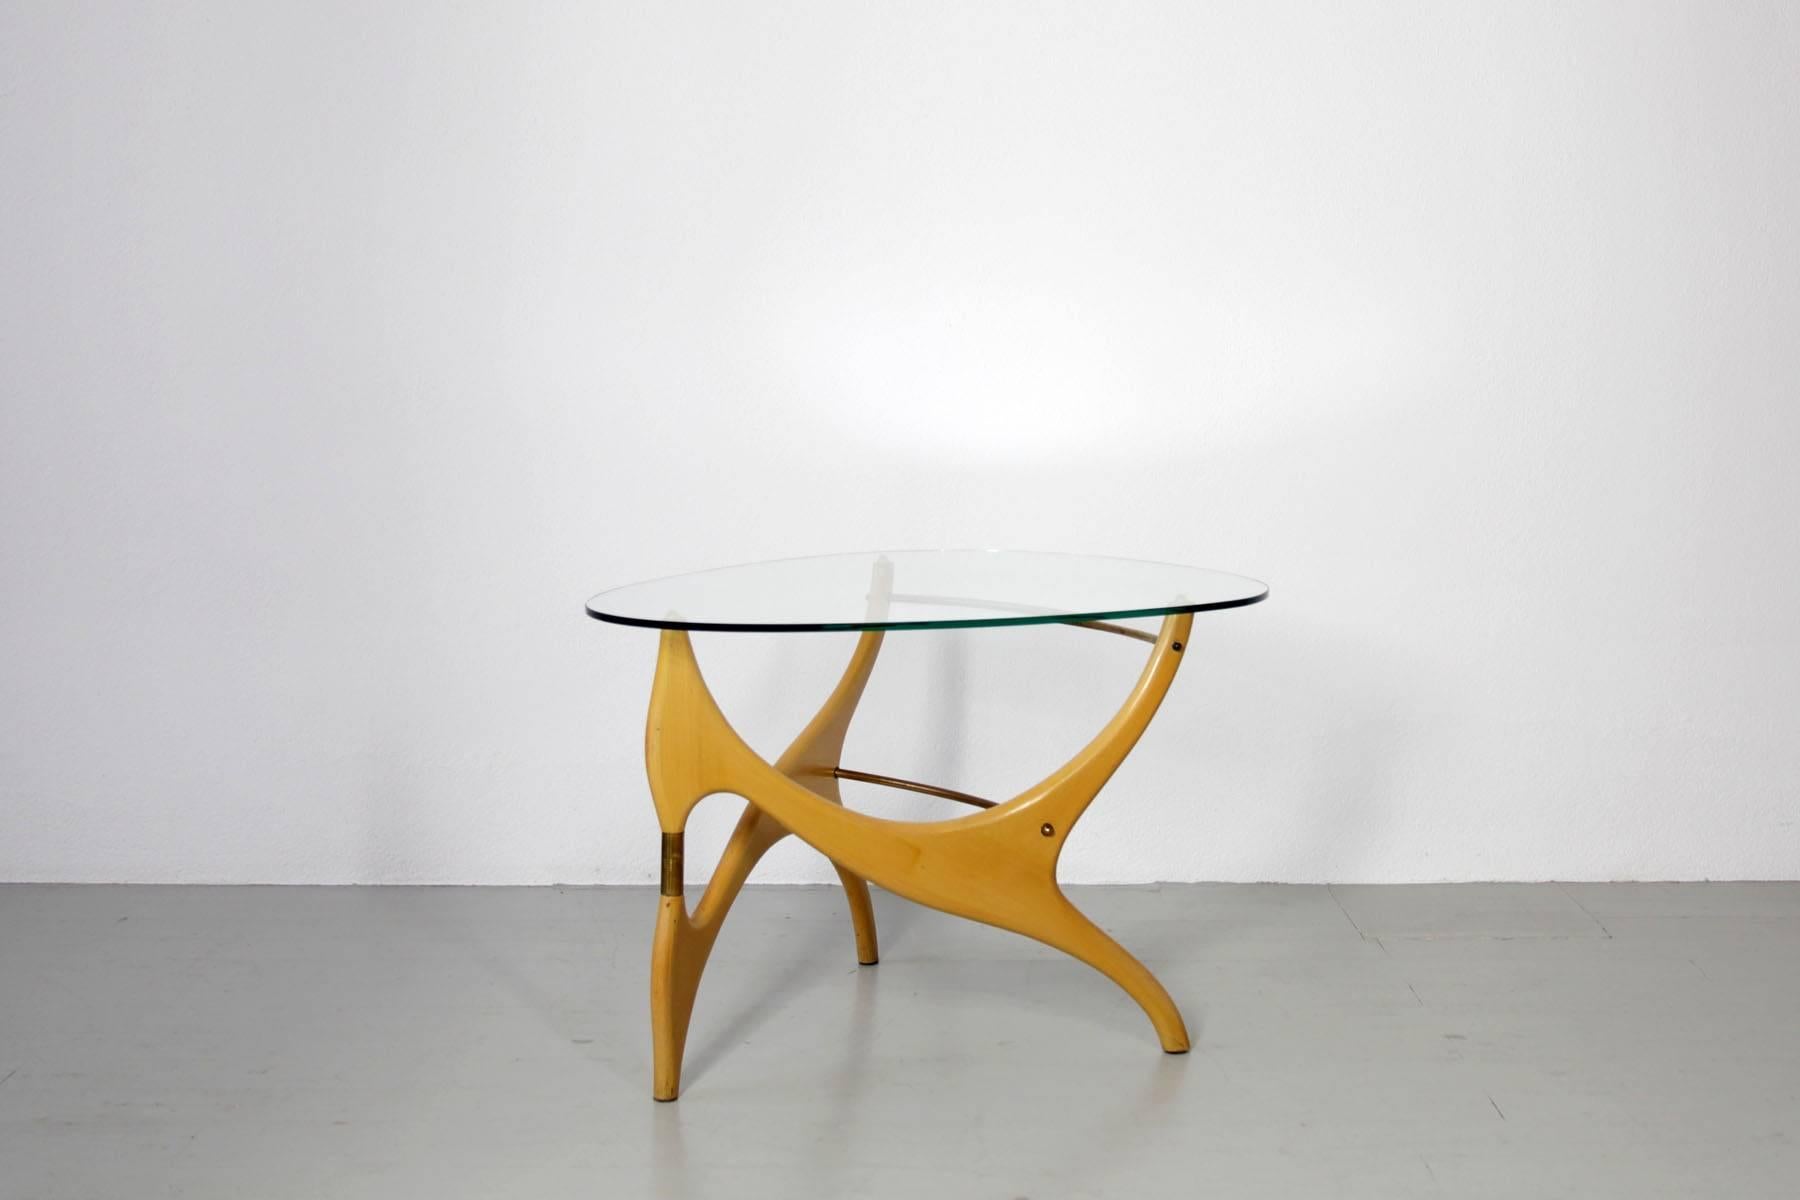 Side or couch table, Italy, 1950s. The table is made out of birchwood and reminds of designs by Carlo Mollino. The egg-shaped glass top unifies the organic forms. The brass elements become decorative element and necessary structural element for the